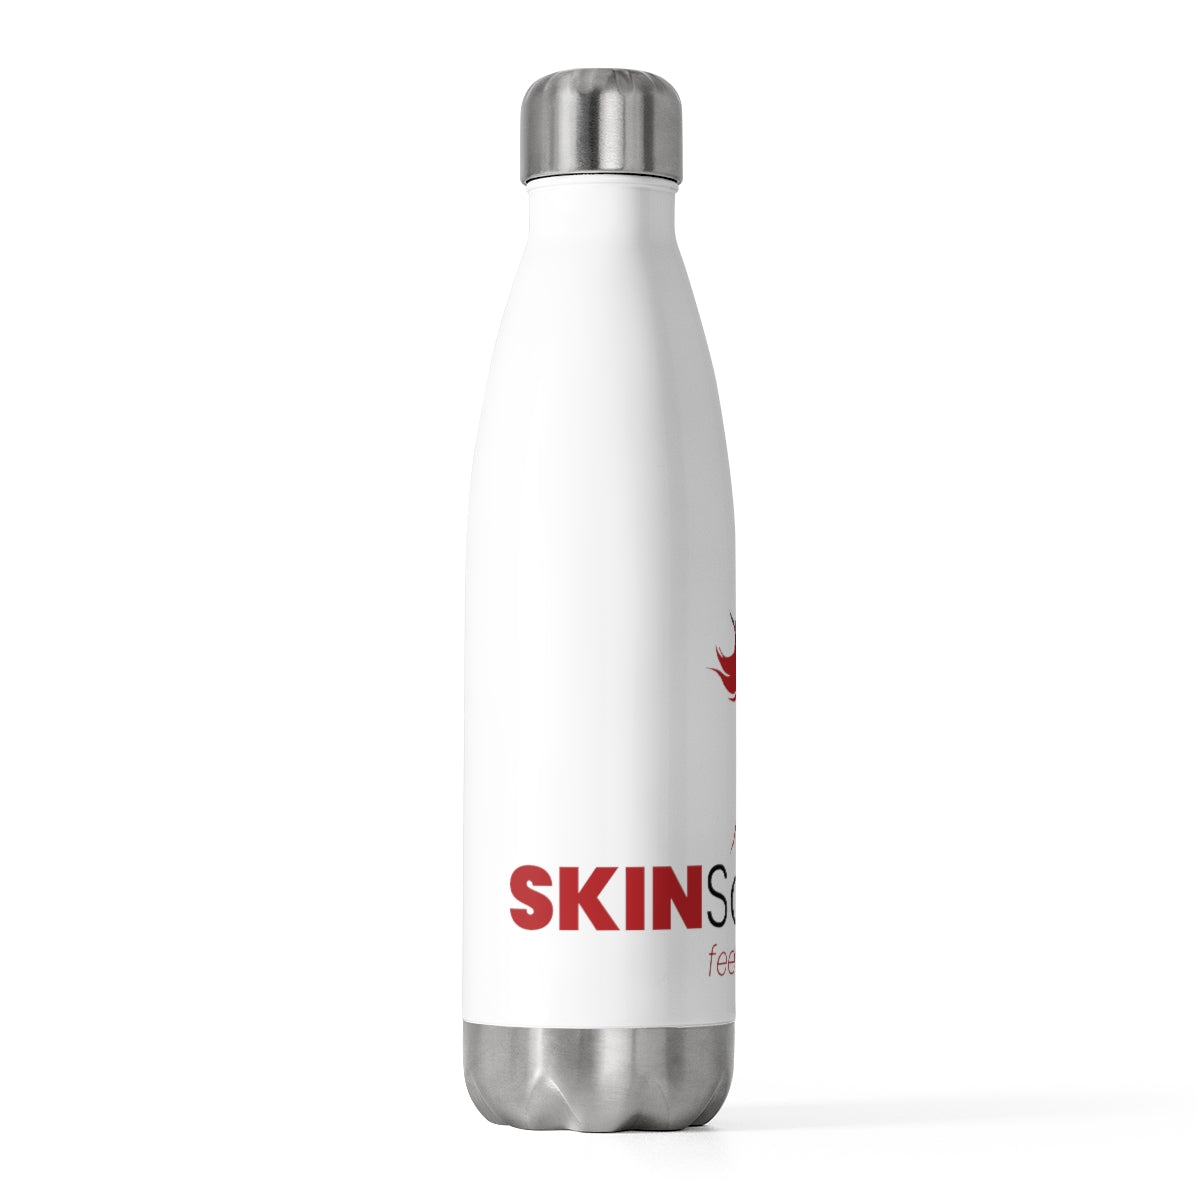 Skin Salvation Stainless Steel Insulated Water Bottle (20 oz)